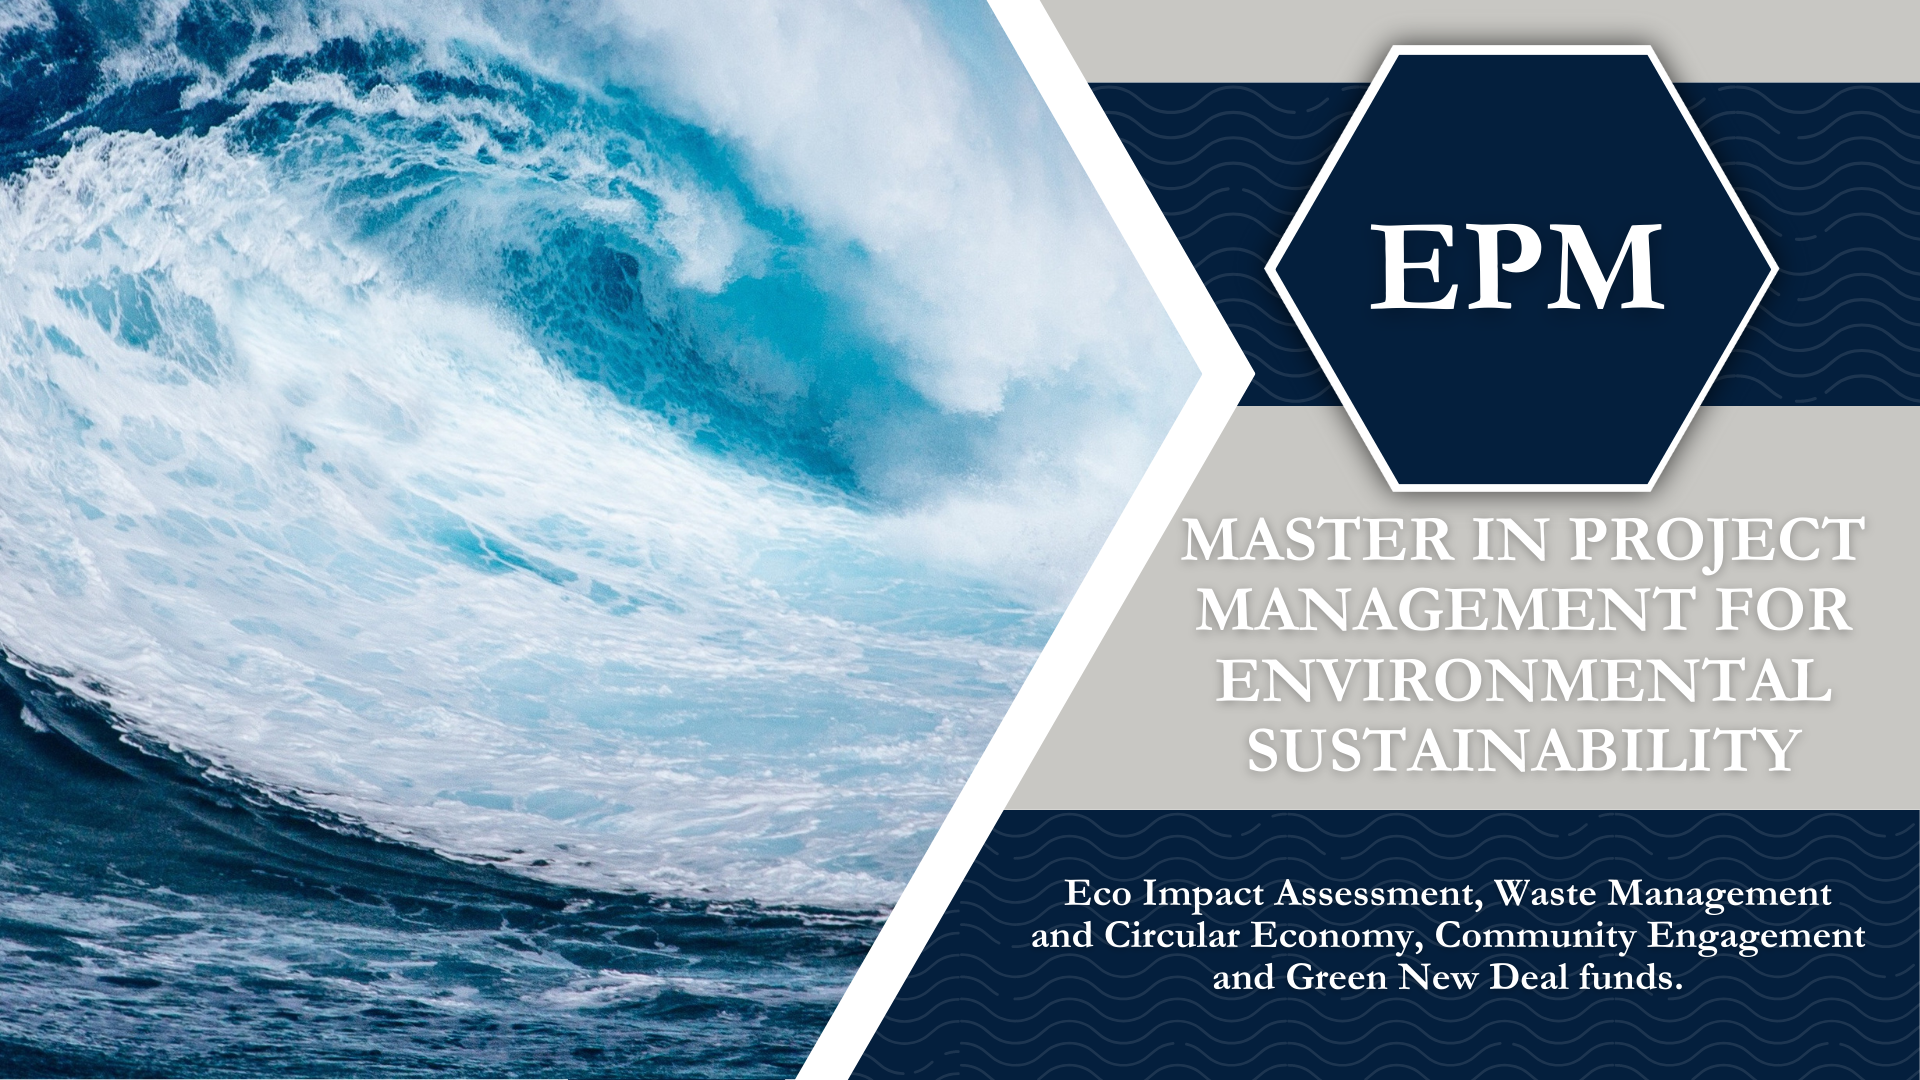 EPM - Master in Project Management for Environmental Sustainability